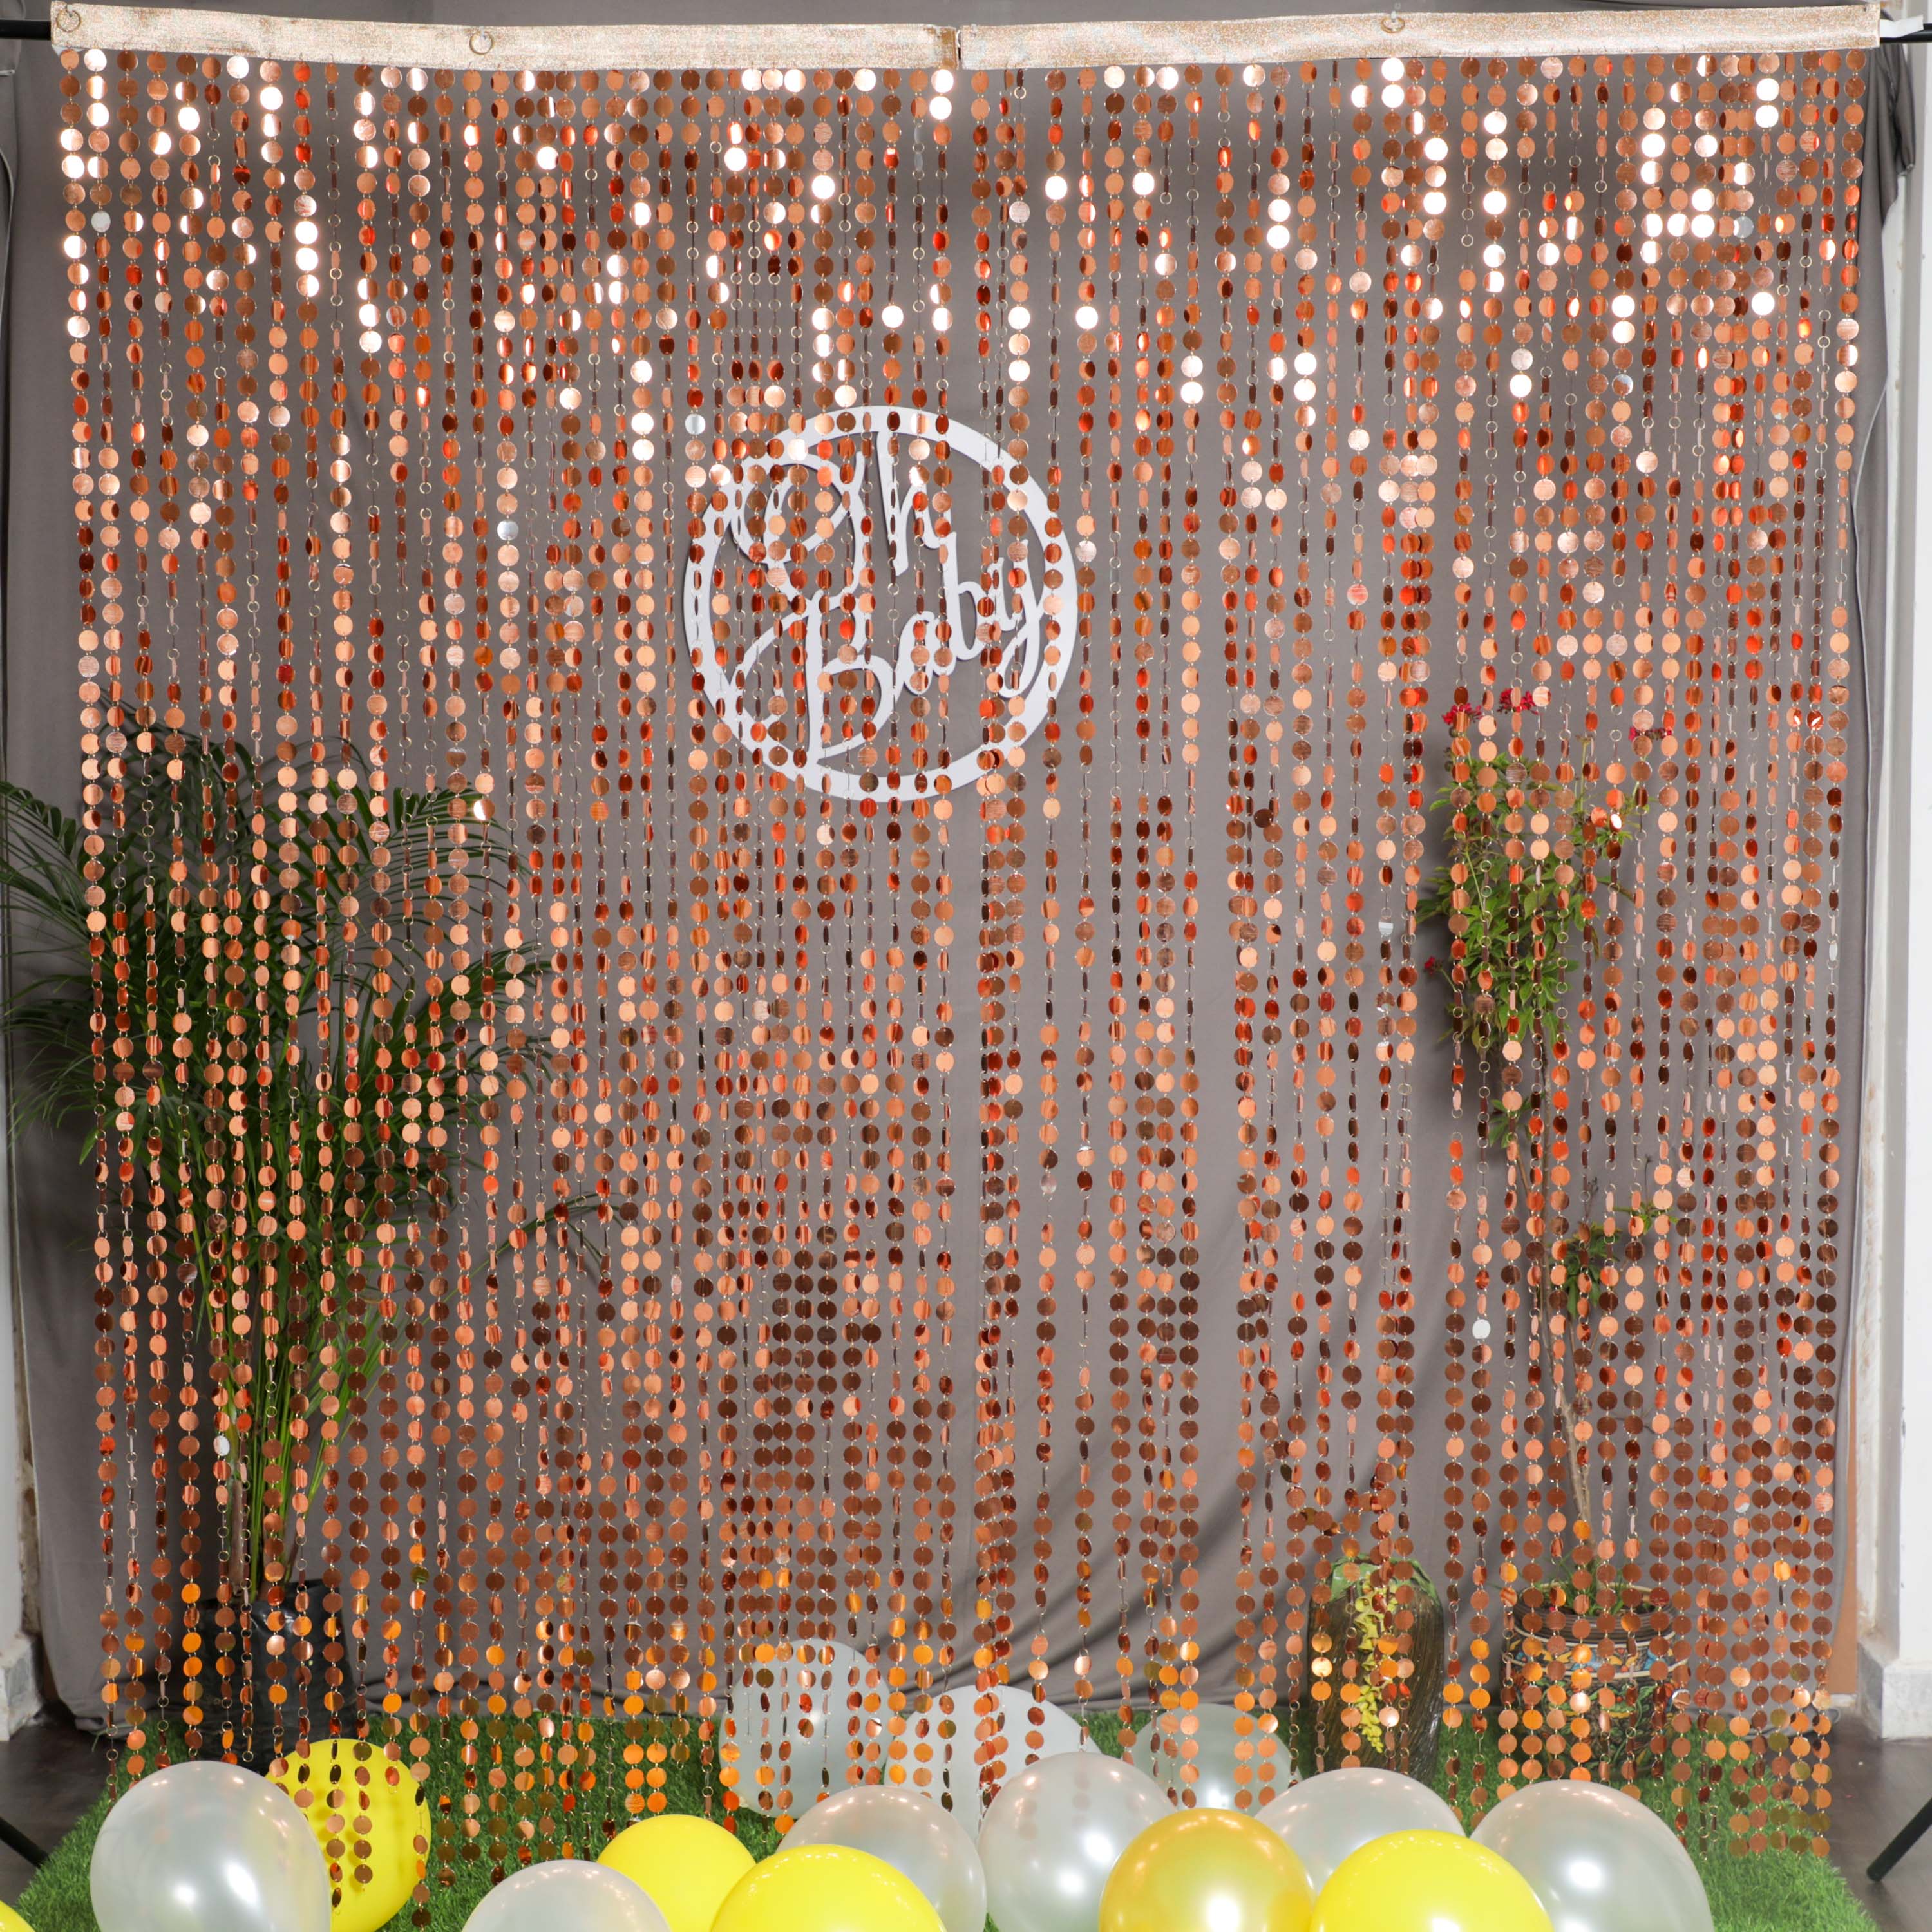 Decorative curtain for home, living room